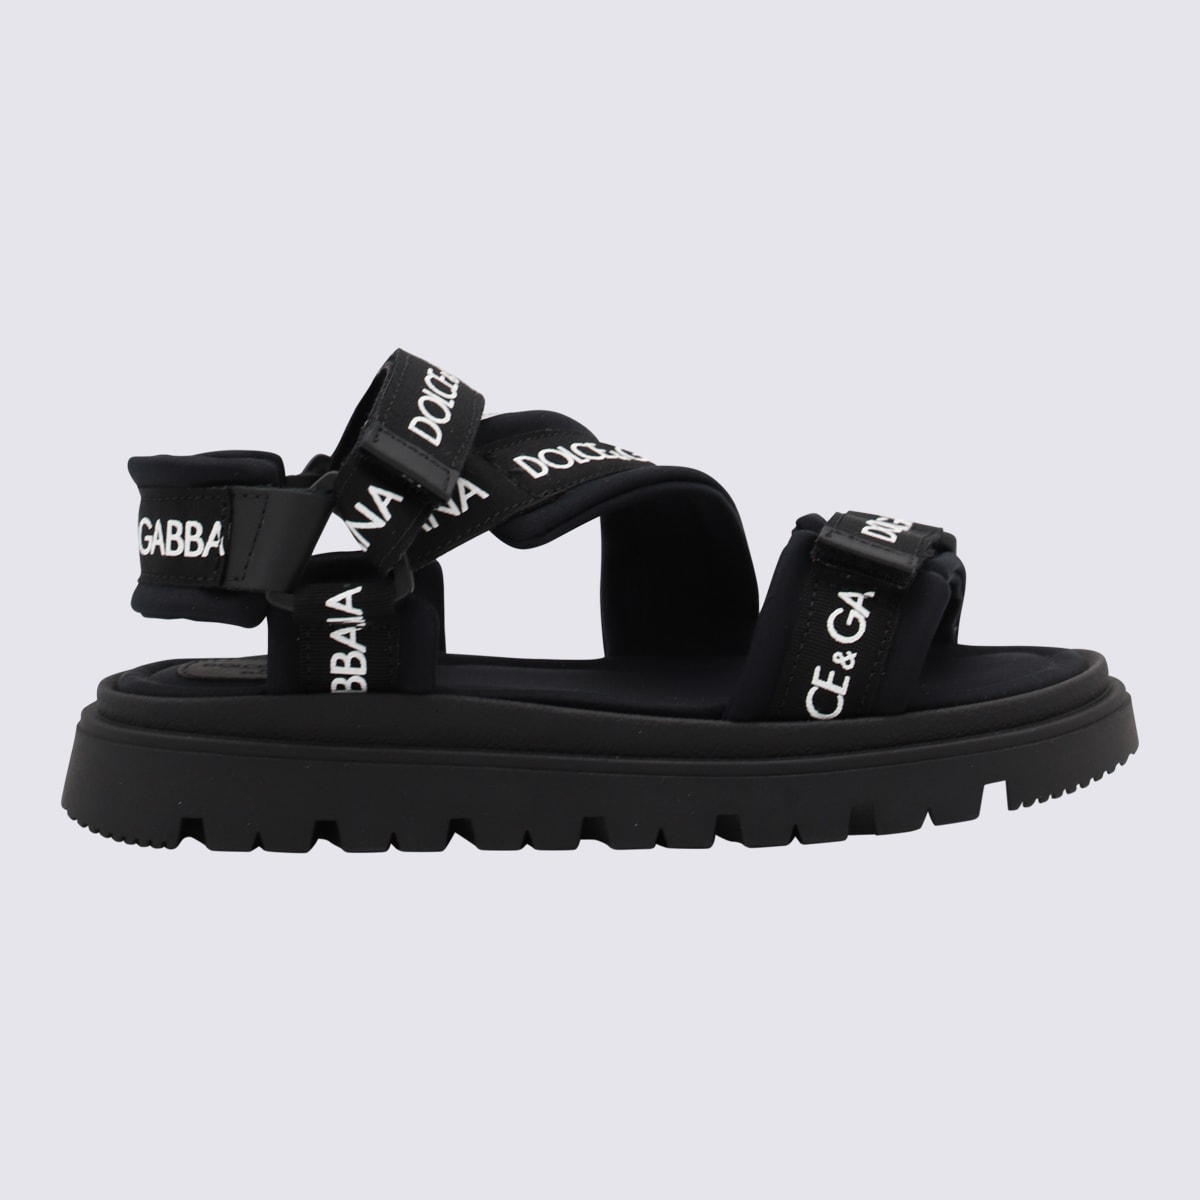 Dolce & Gabbana Kids' Black Cotton And Leather Sandals